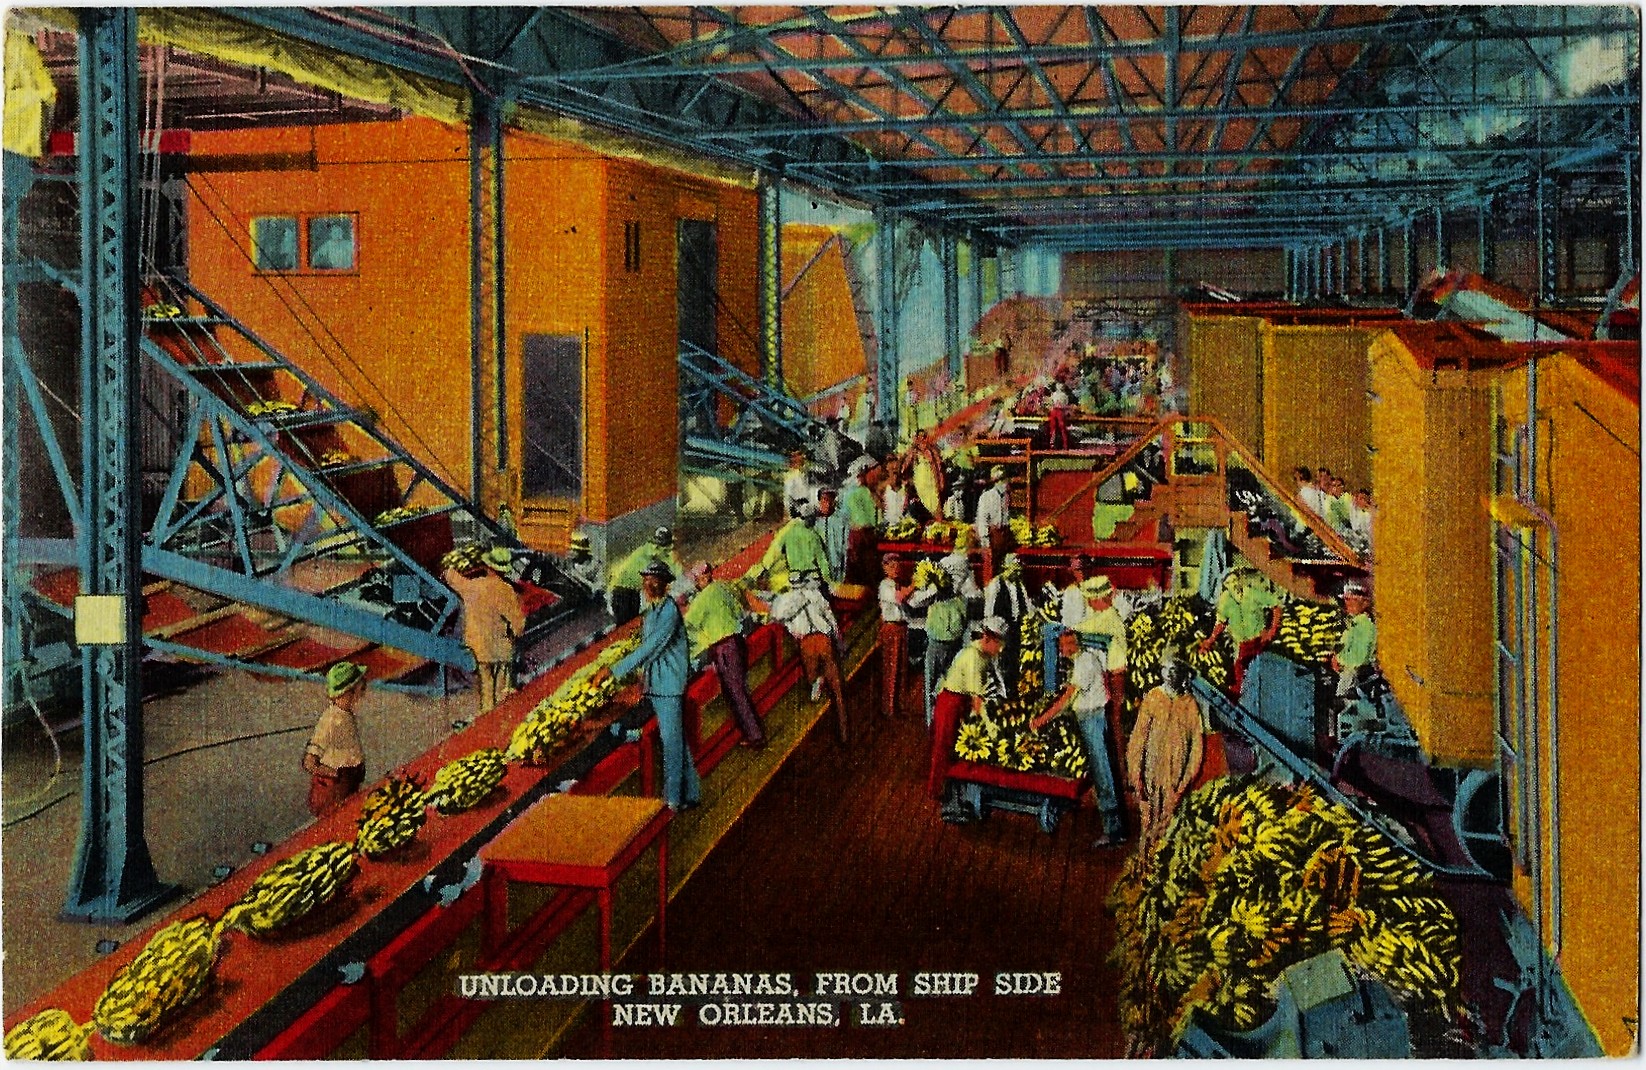 Unloading Bananas from Ship Side New Orleans LA Postcard 7A-H312